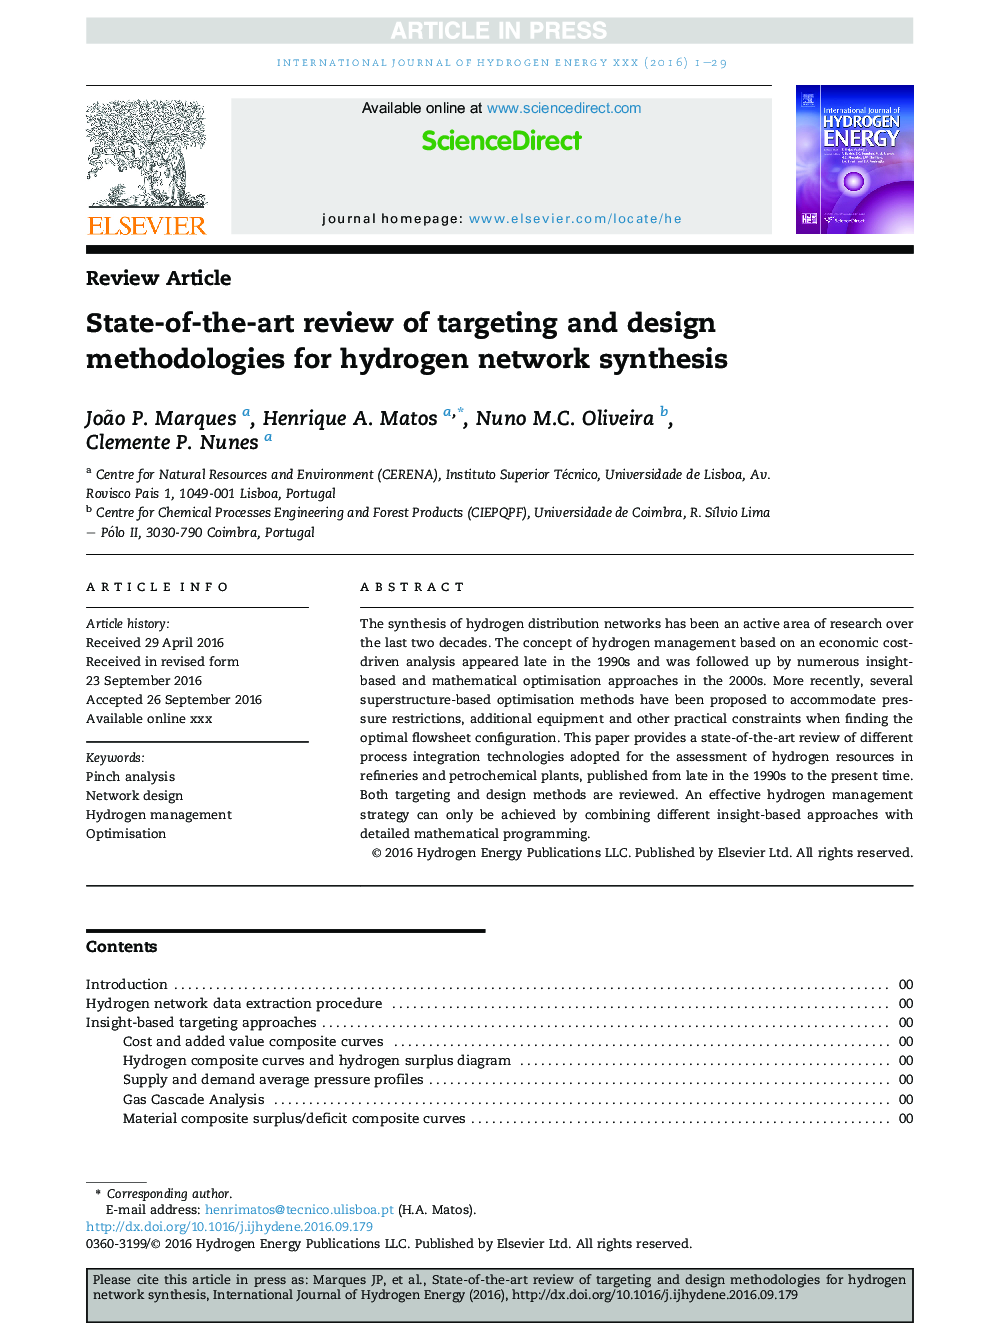 State-of-the-art review of targeting and design methodologies for hydrogen network synthesis